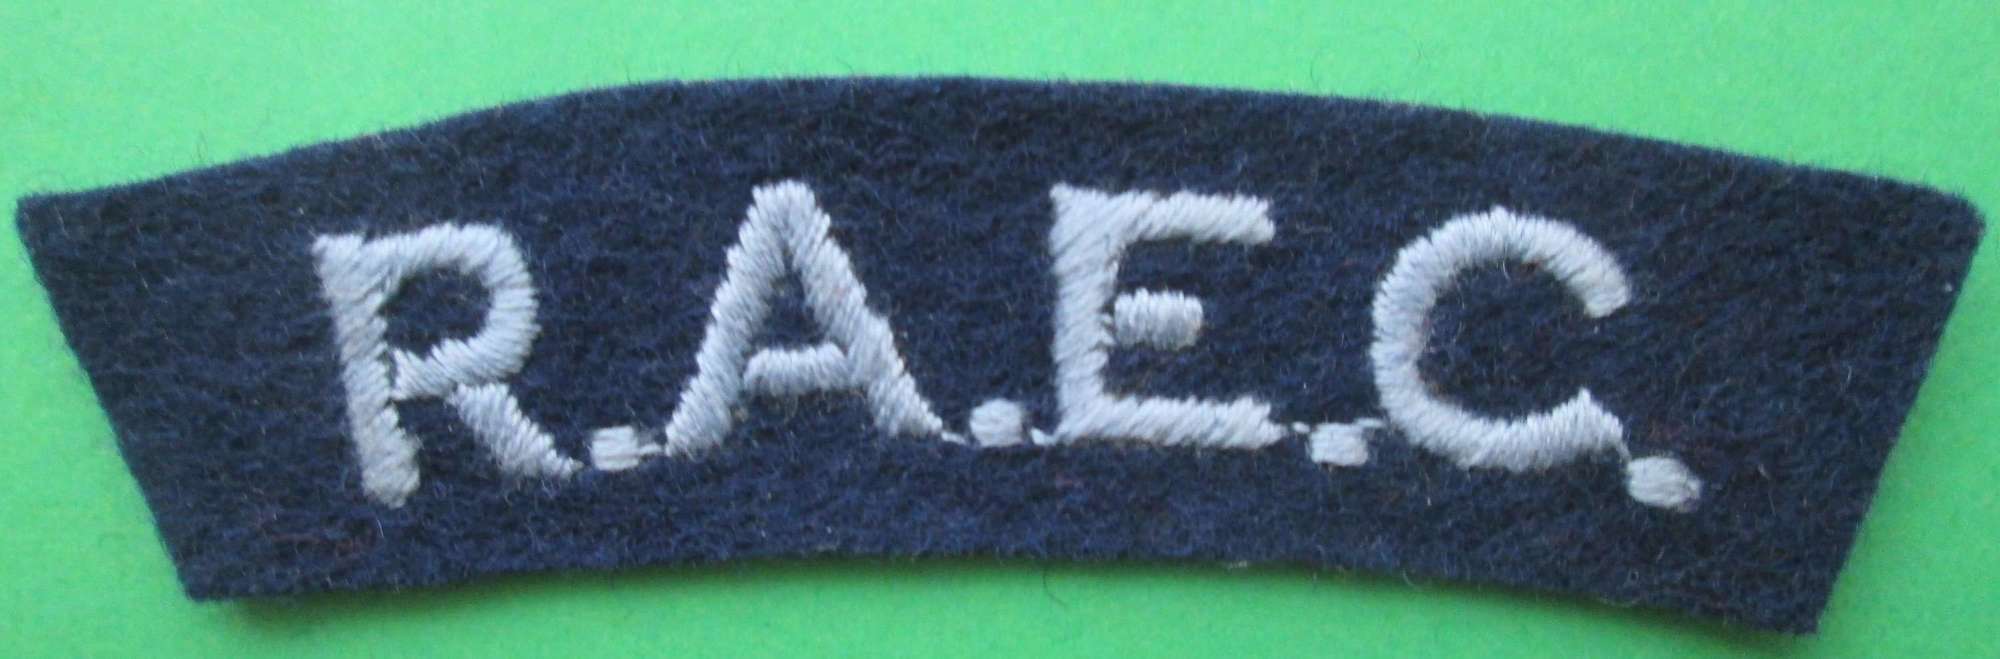 Royal Army Educational Corps shoulder title